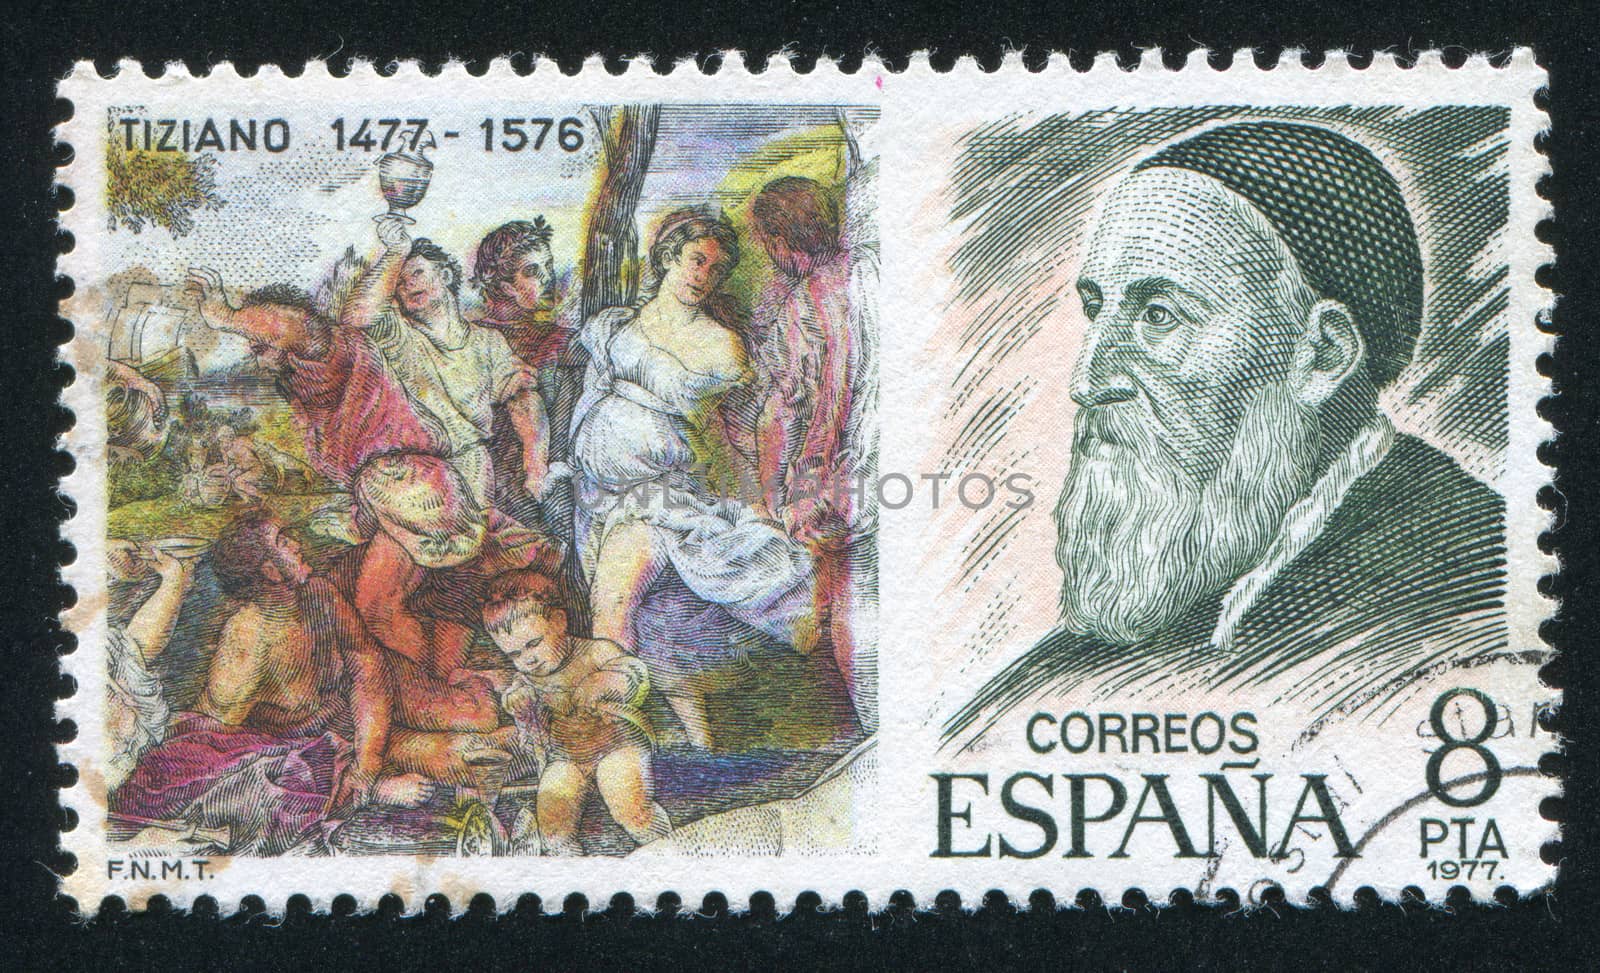 SPAIN - CIRCA 1977: stamp printed by Spain, shows Painting of Judgment and Titian portrait, circa 1977